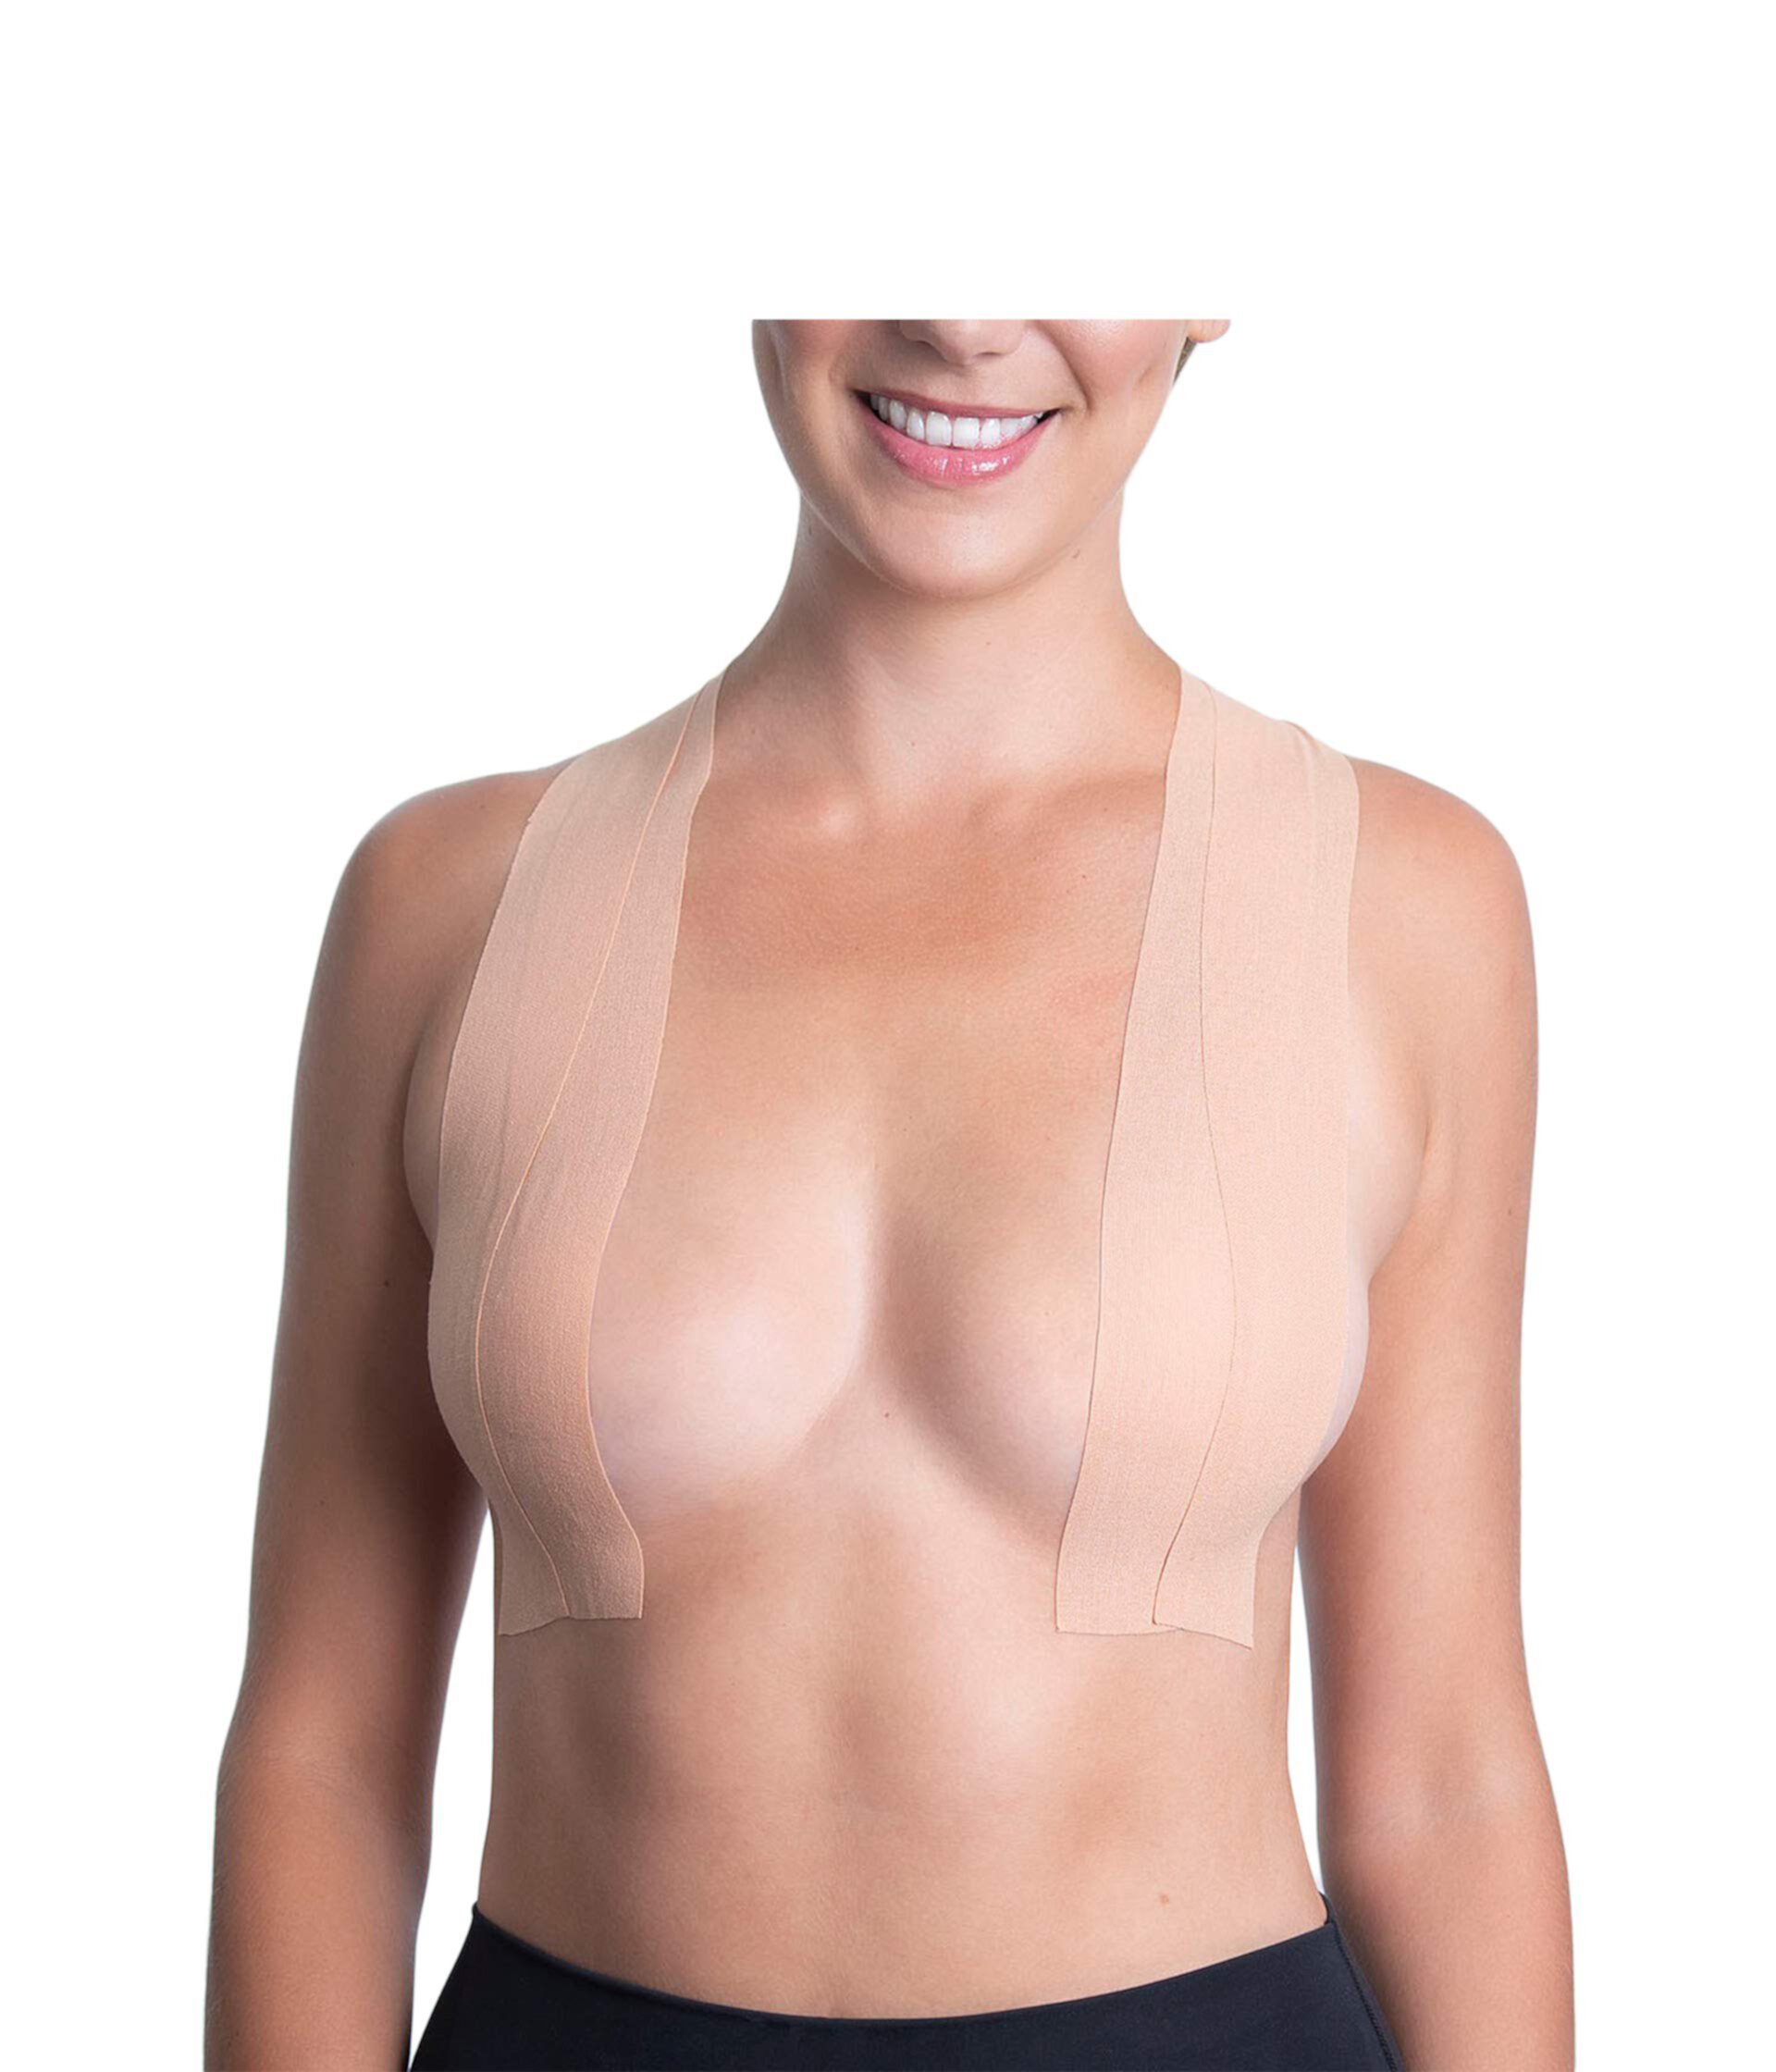 Breast form tape